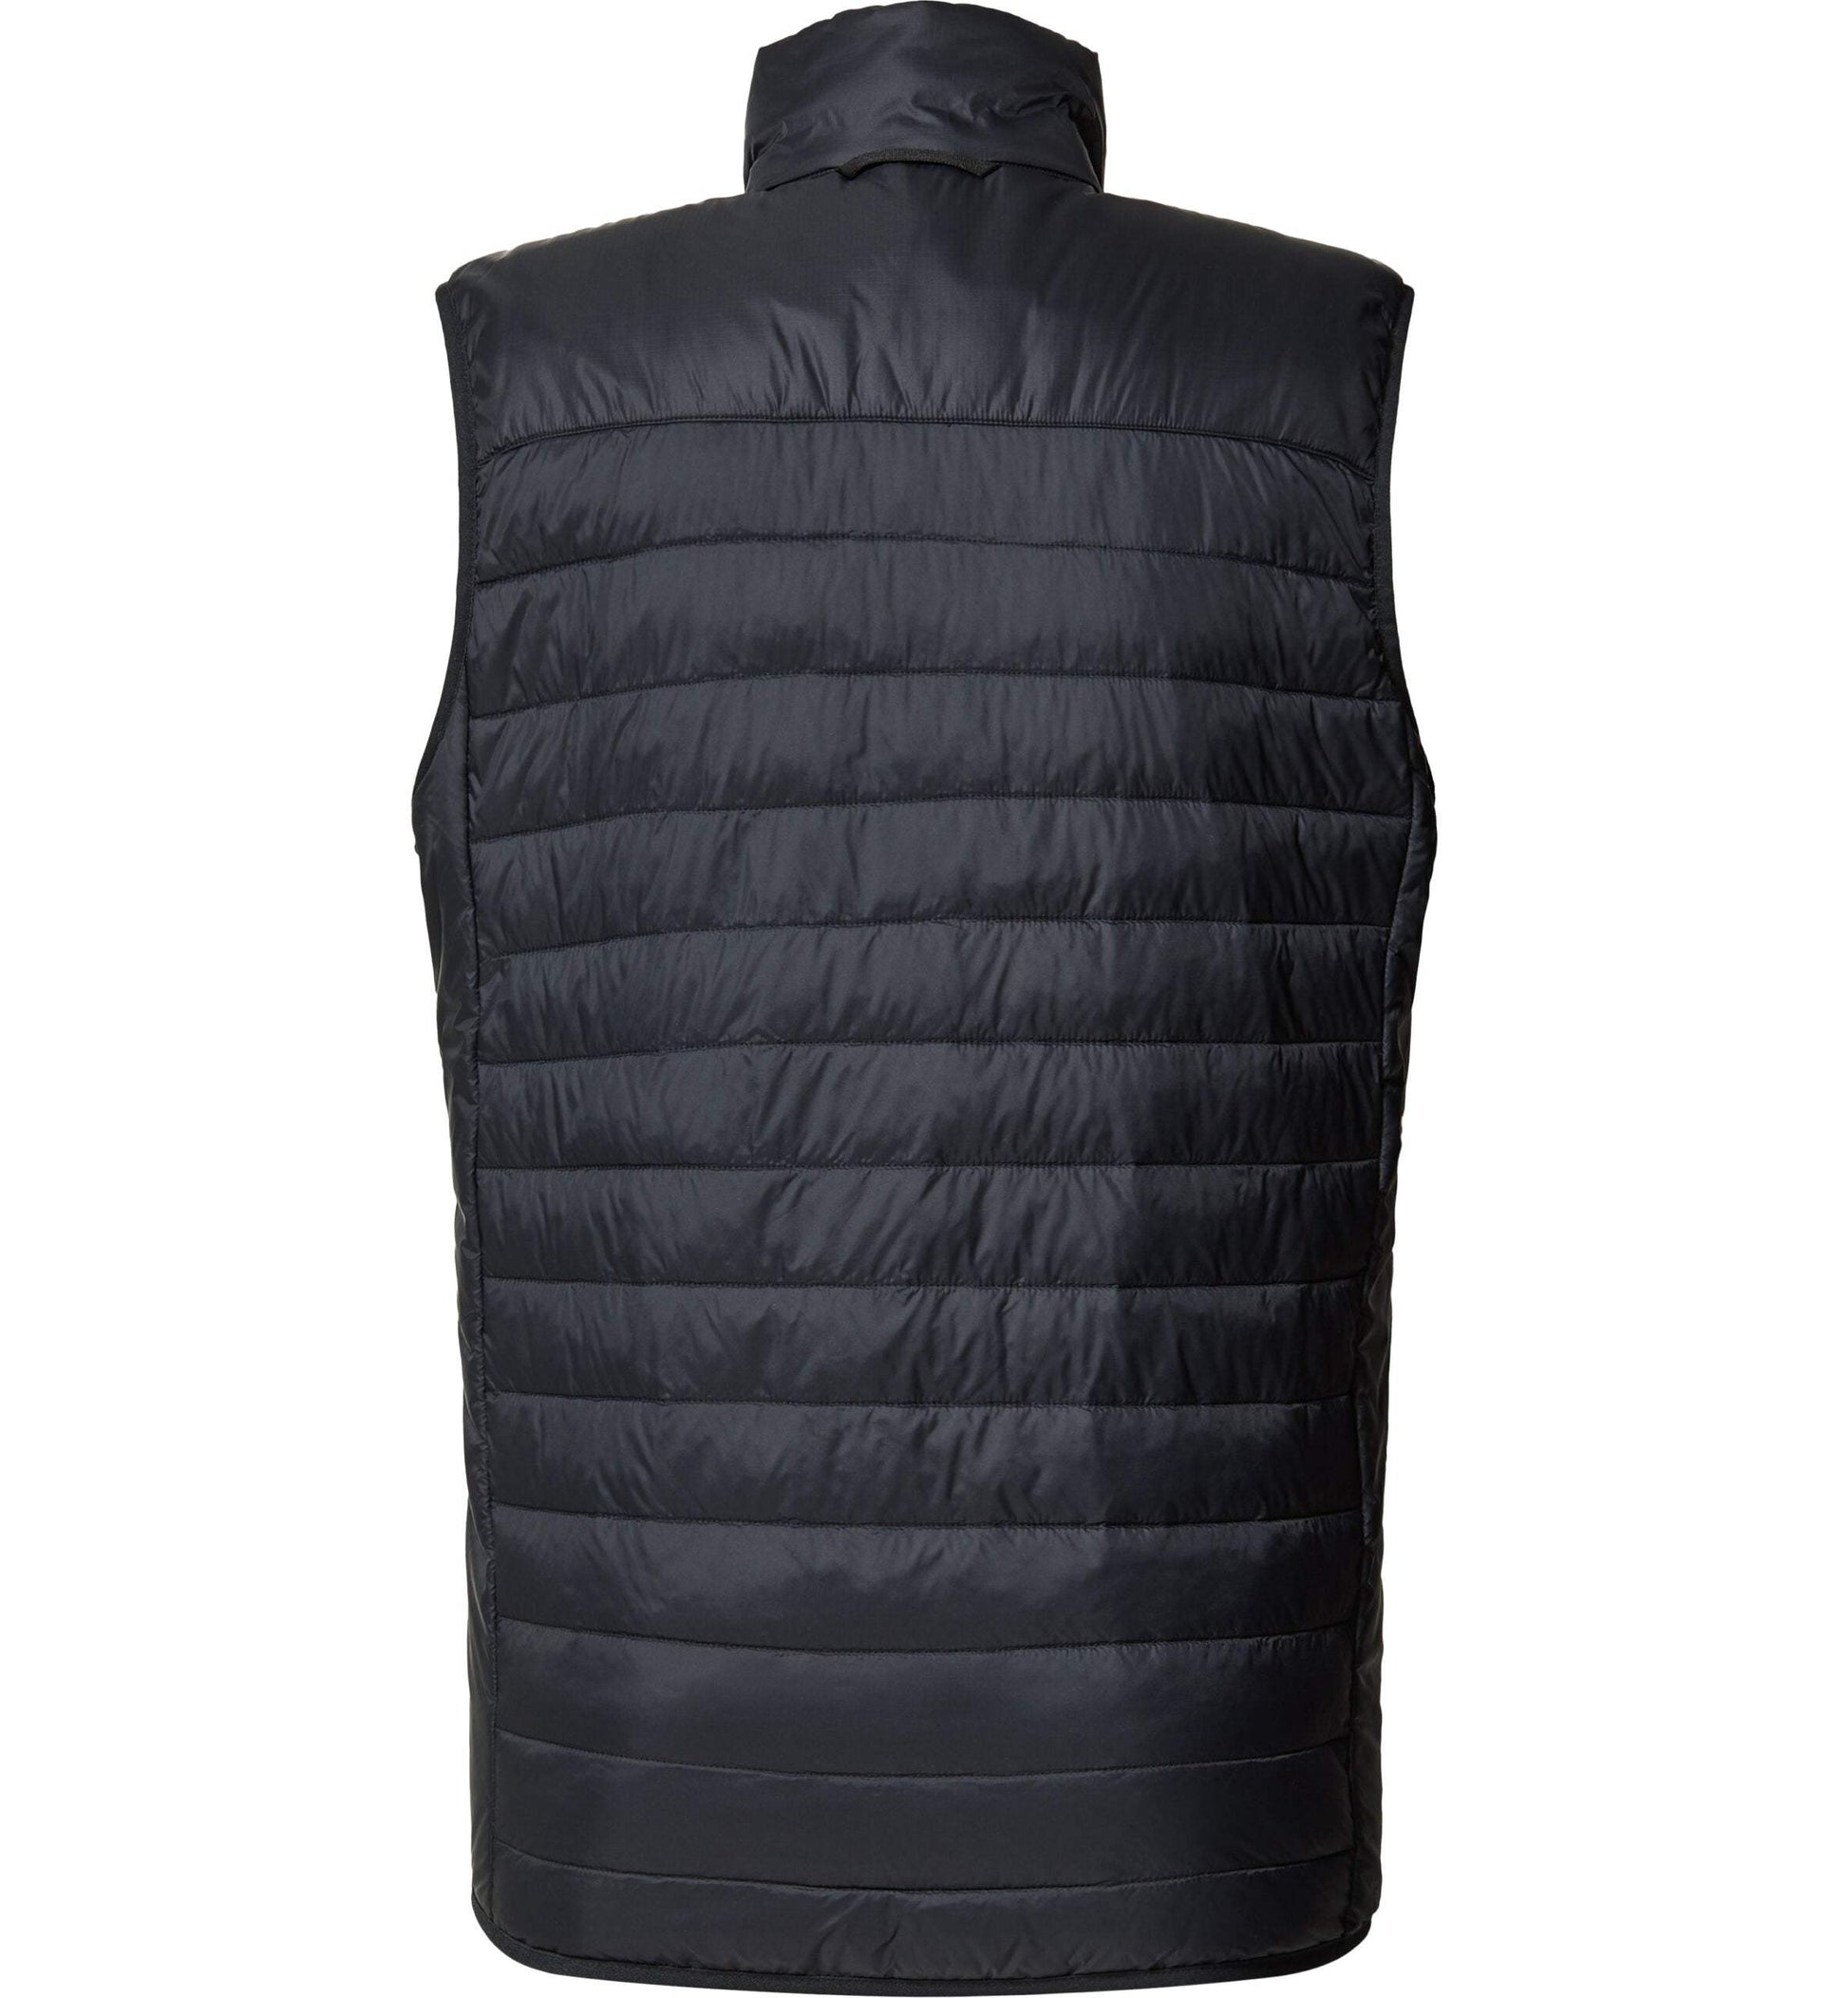 Haglofs Men’s Spire Mimic Vest - The Luxury Promotional Gifts Company Limited